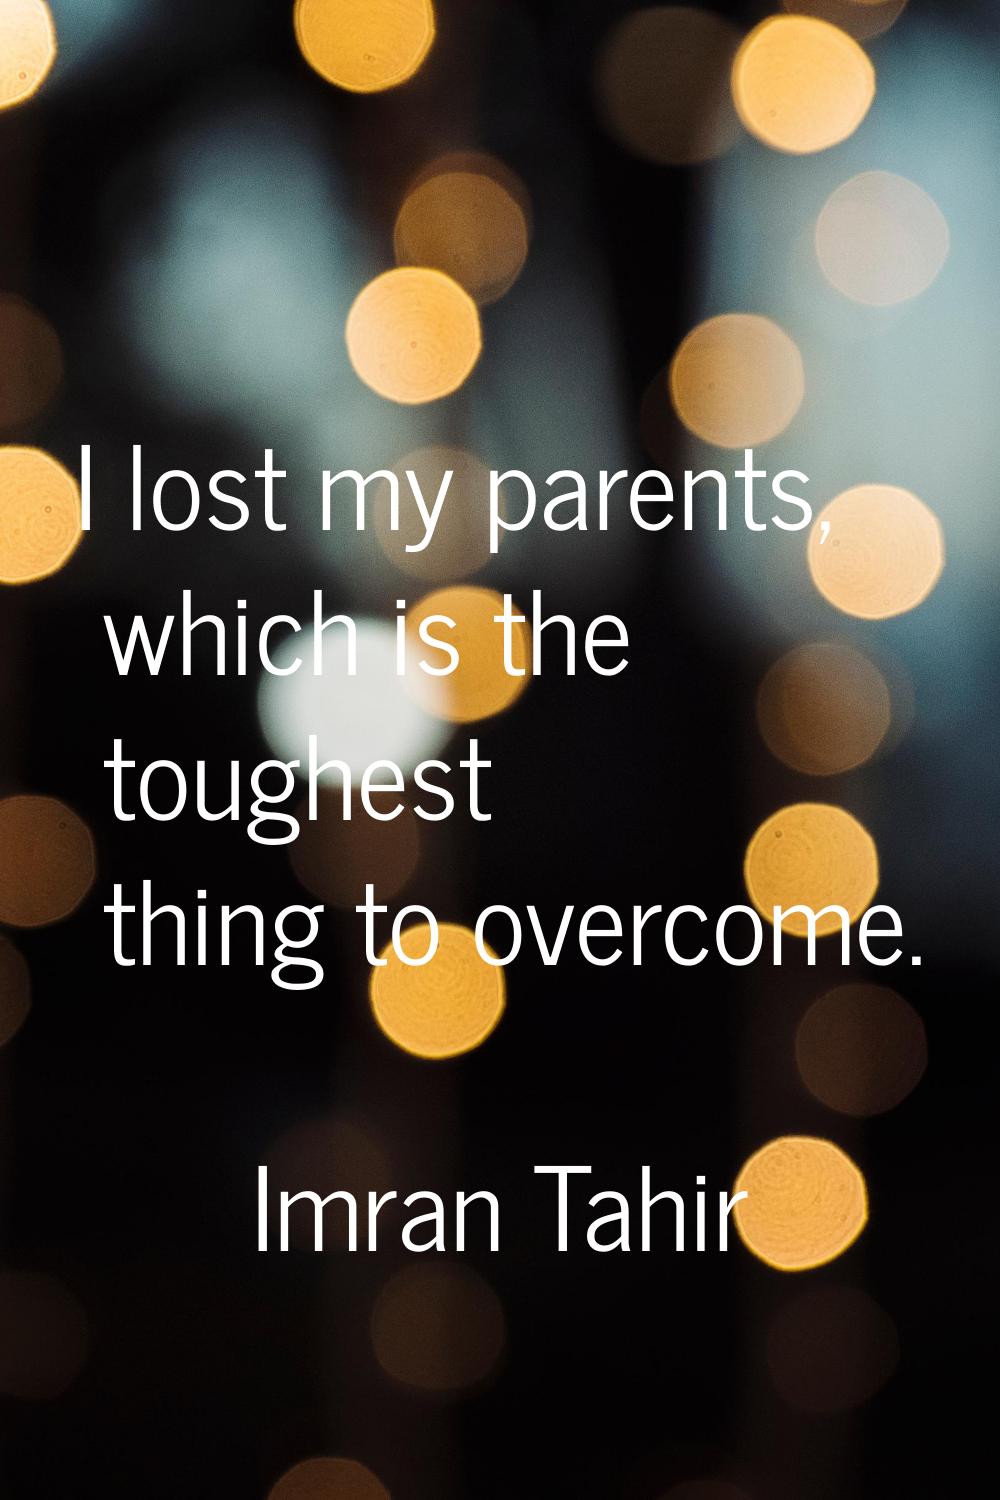 I lost my parents, which is the toughest thing to overcome.